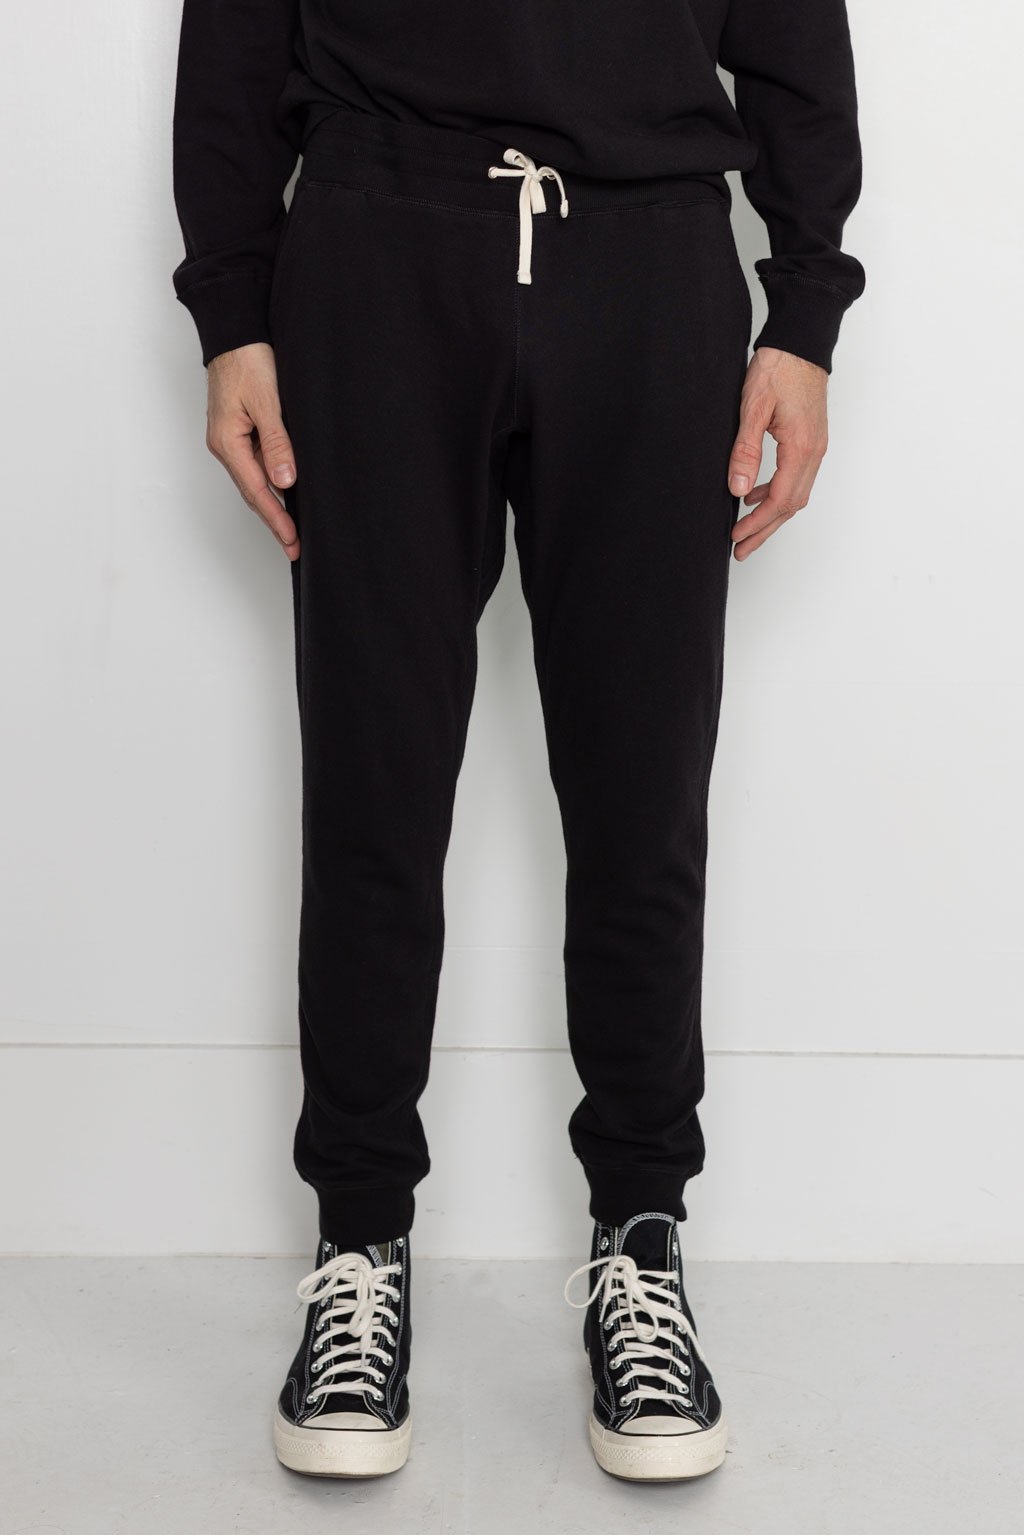 NS2167-1 250g French Terry Sweatpants in Black 02